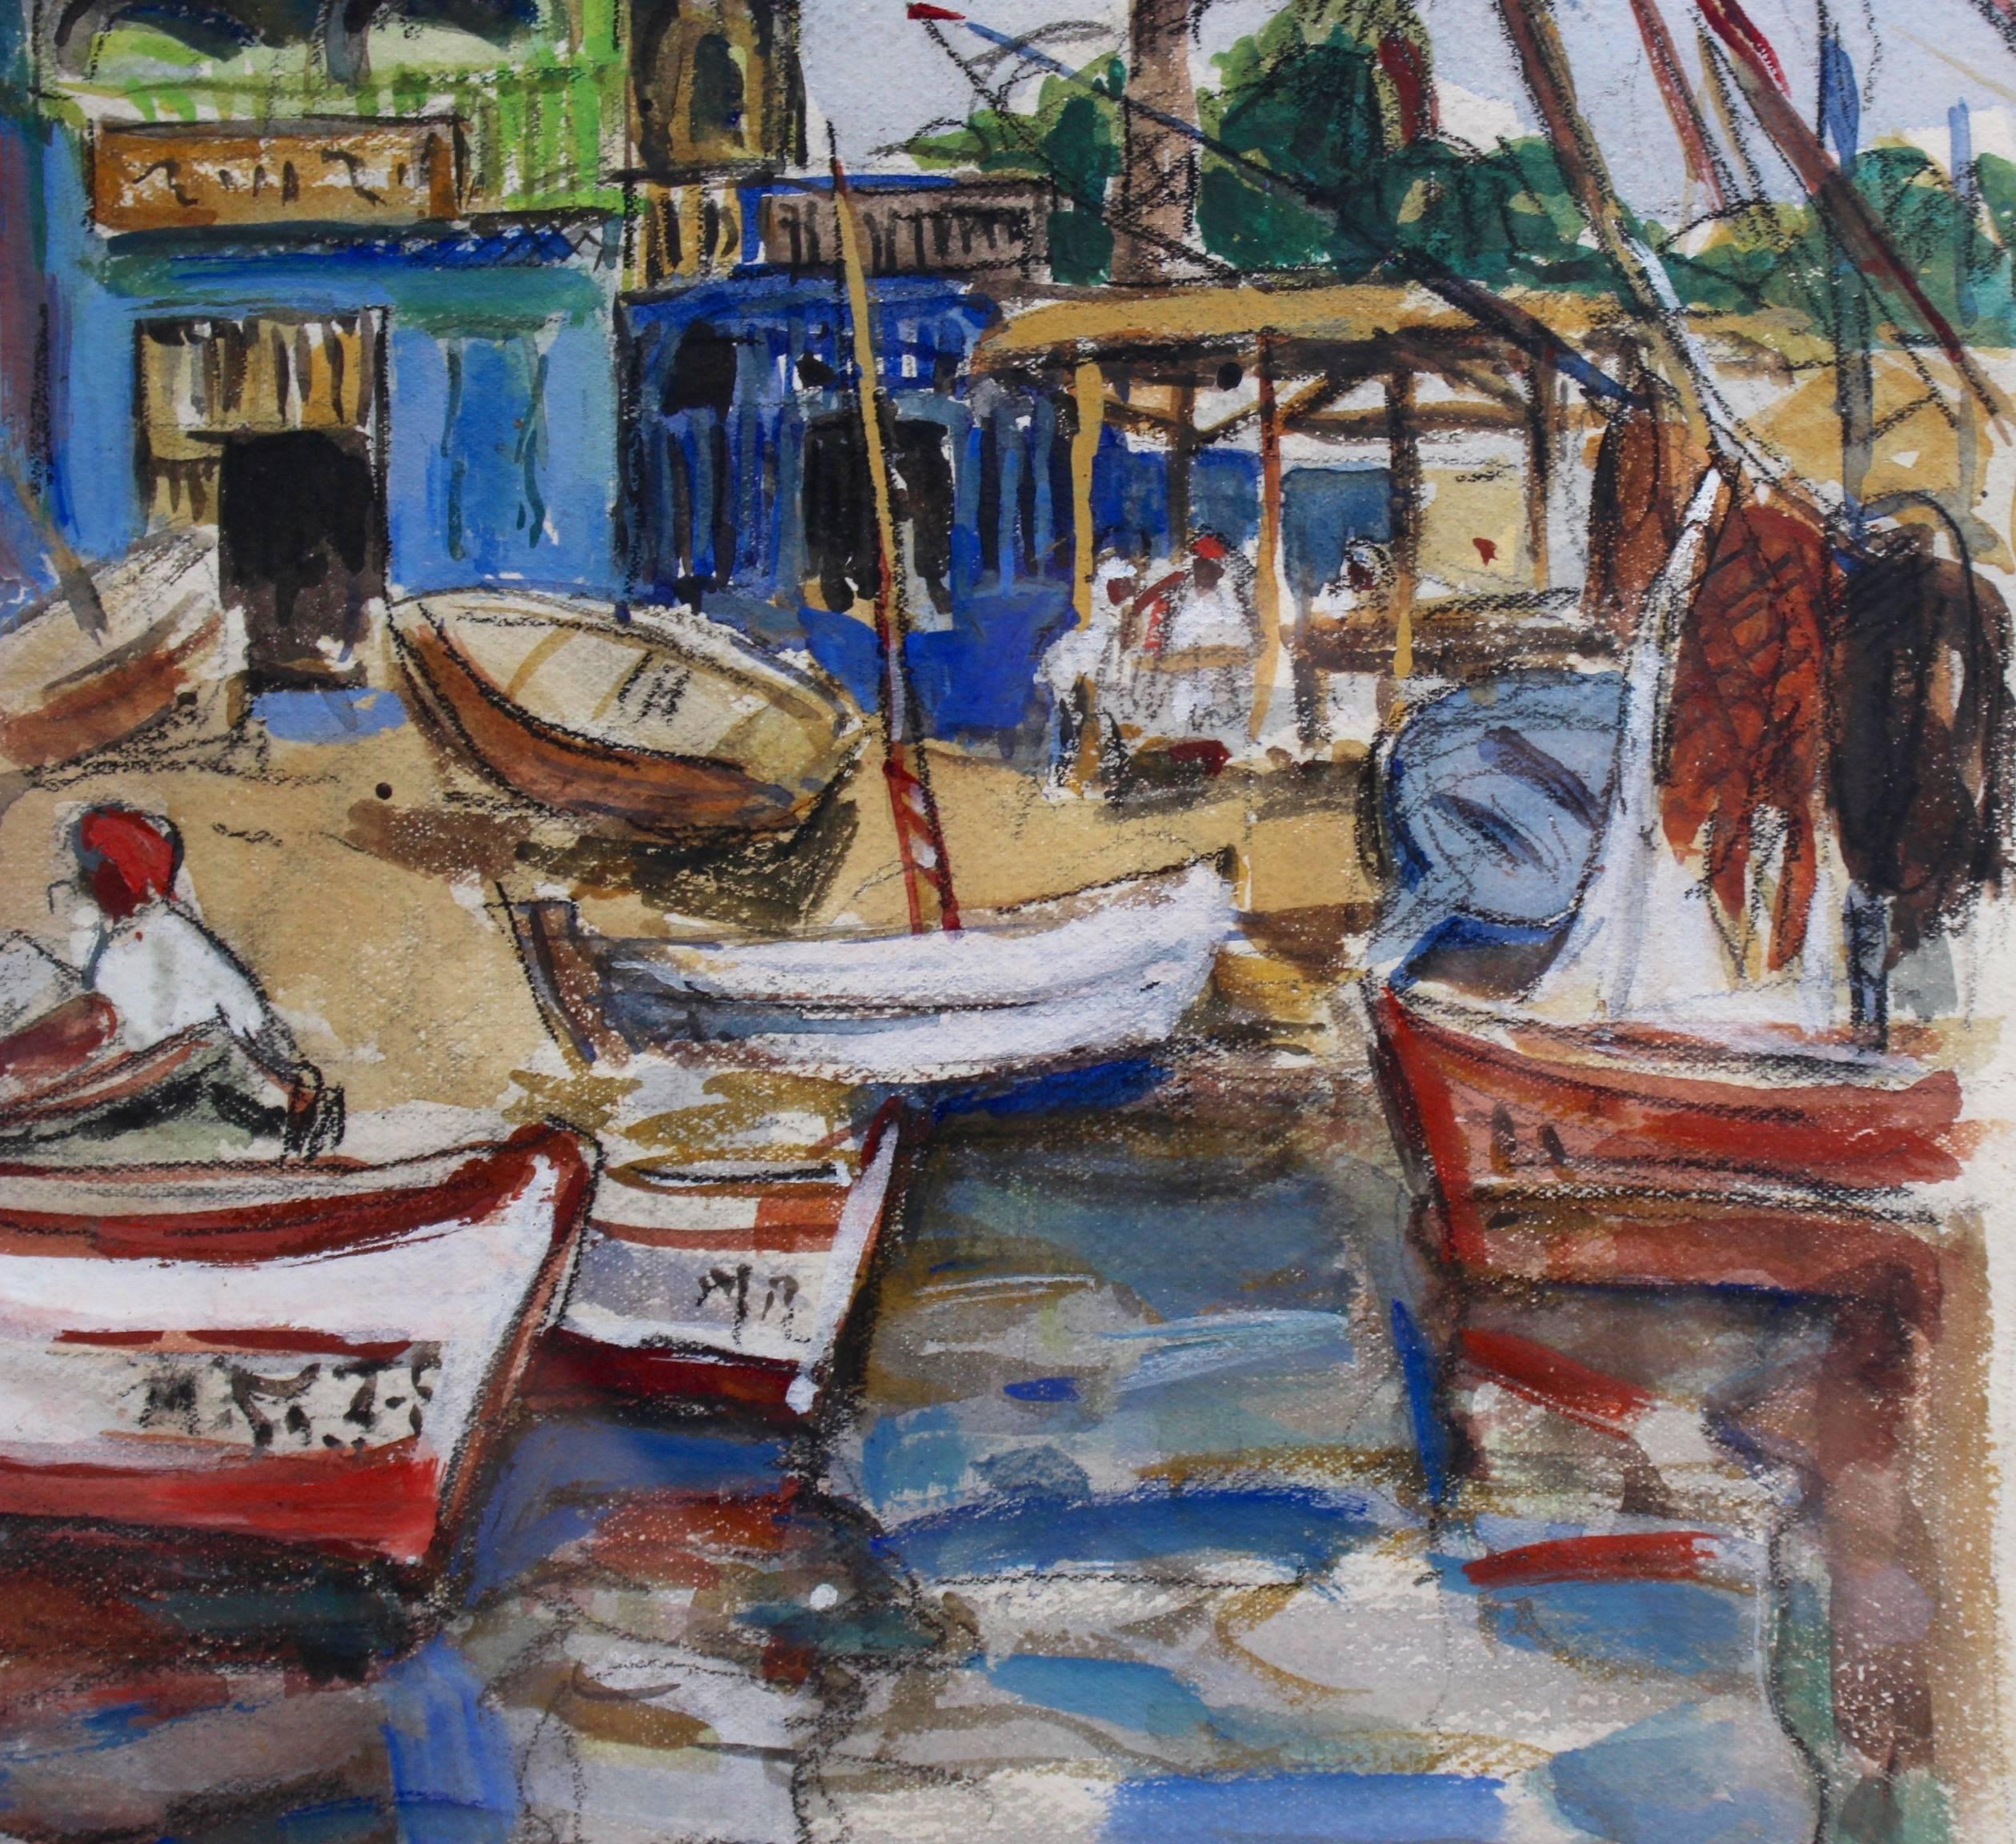 Pastels on paper (c. 1970s). An enchanting scene of a placid Mediterranean fishing port. Palm trees, blue skies, men going about their business selling to passers-by; others seated in the background having lunch under a shaded canopy. Signed 'F